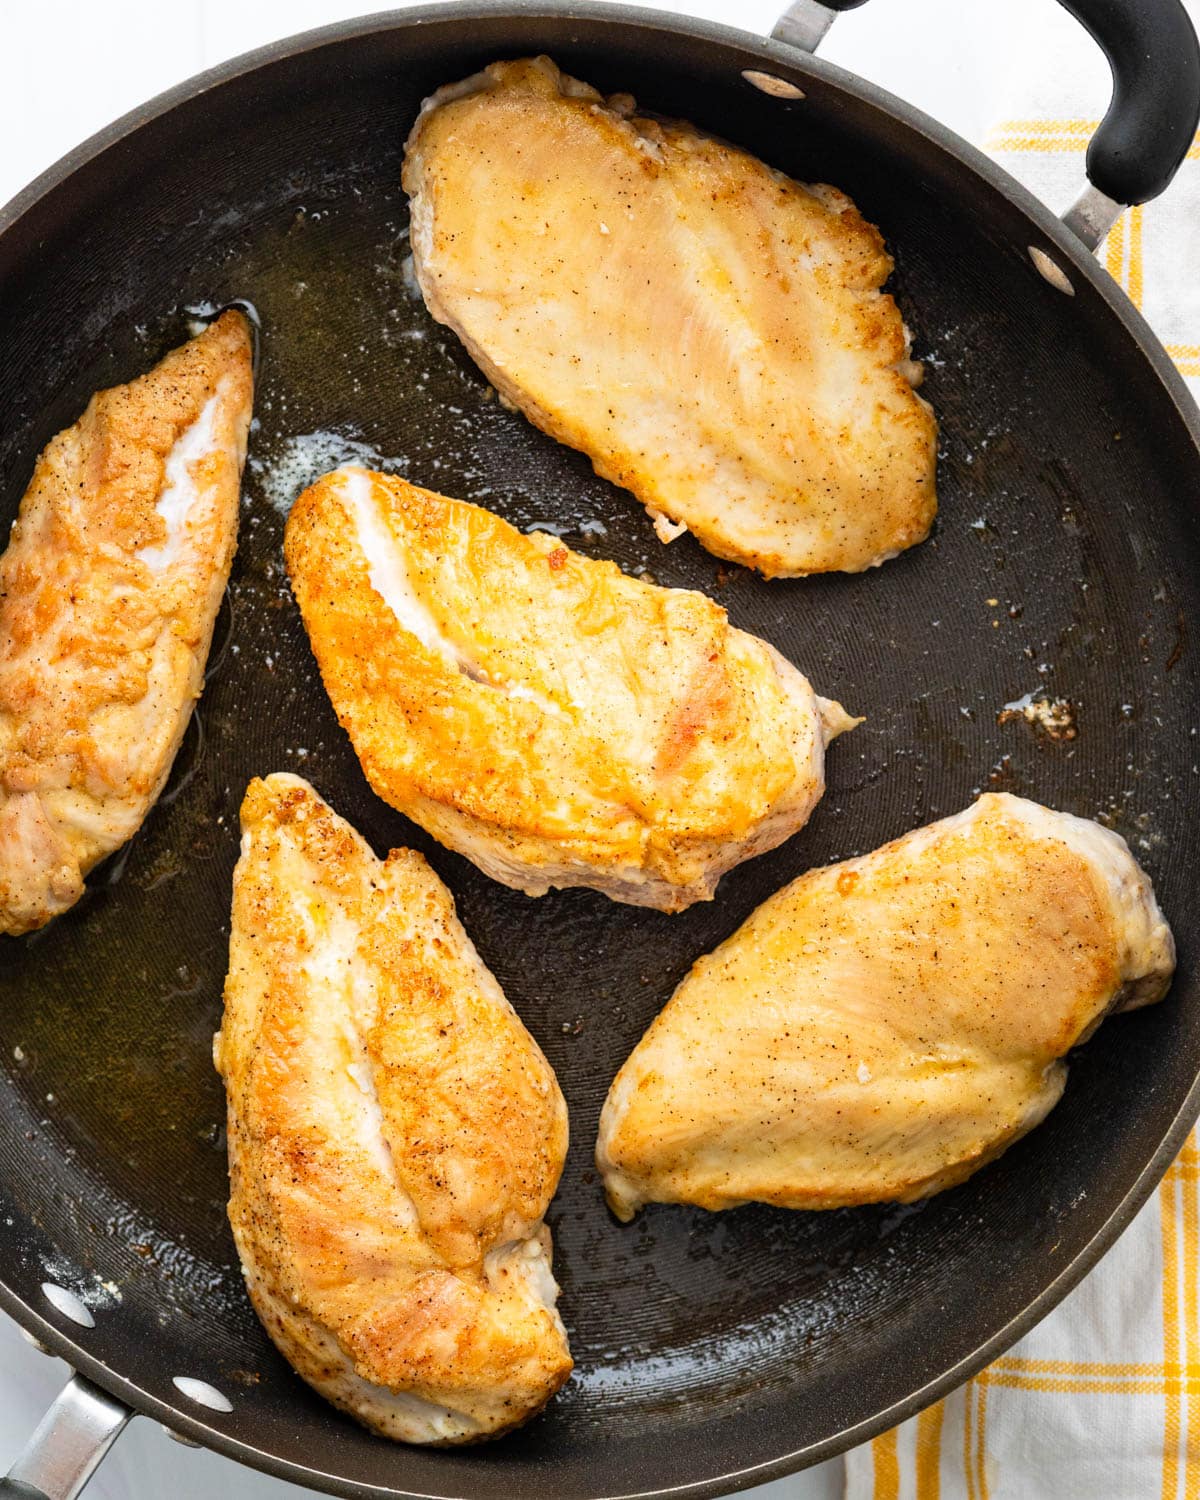 Pan frying the chicken breasts in a large skillet.